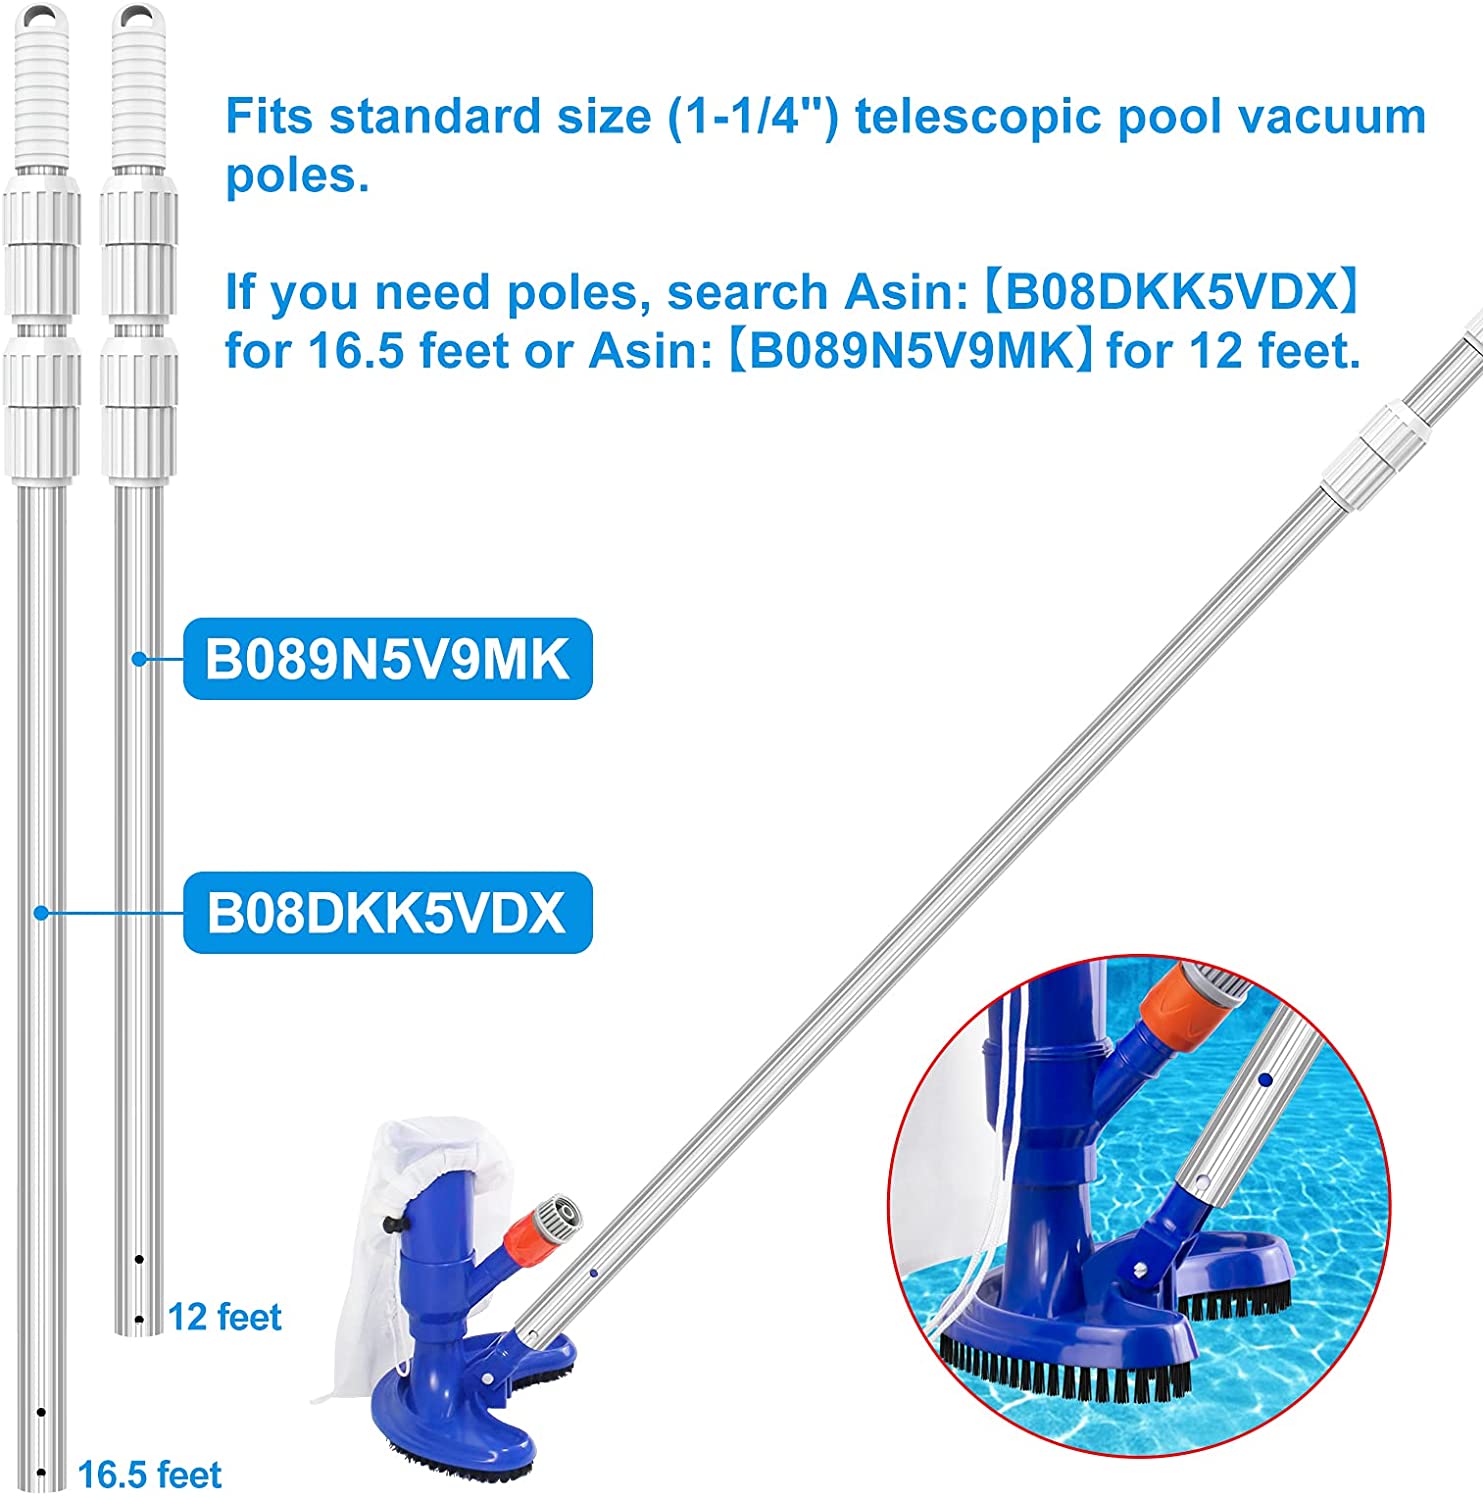 S-Union Portable Pool Vacuums Mini Jet Underwater Cleaner with Brush, Mesh Bag for Cleaning Small Swimming Pool, Spa, Fountain